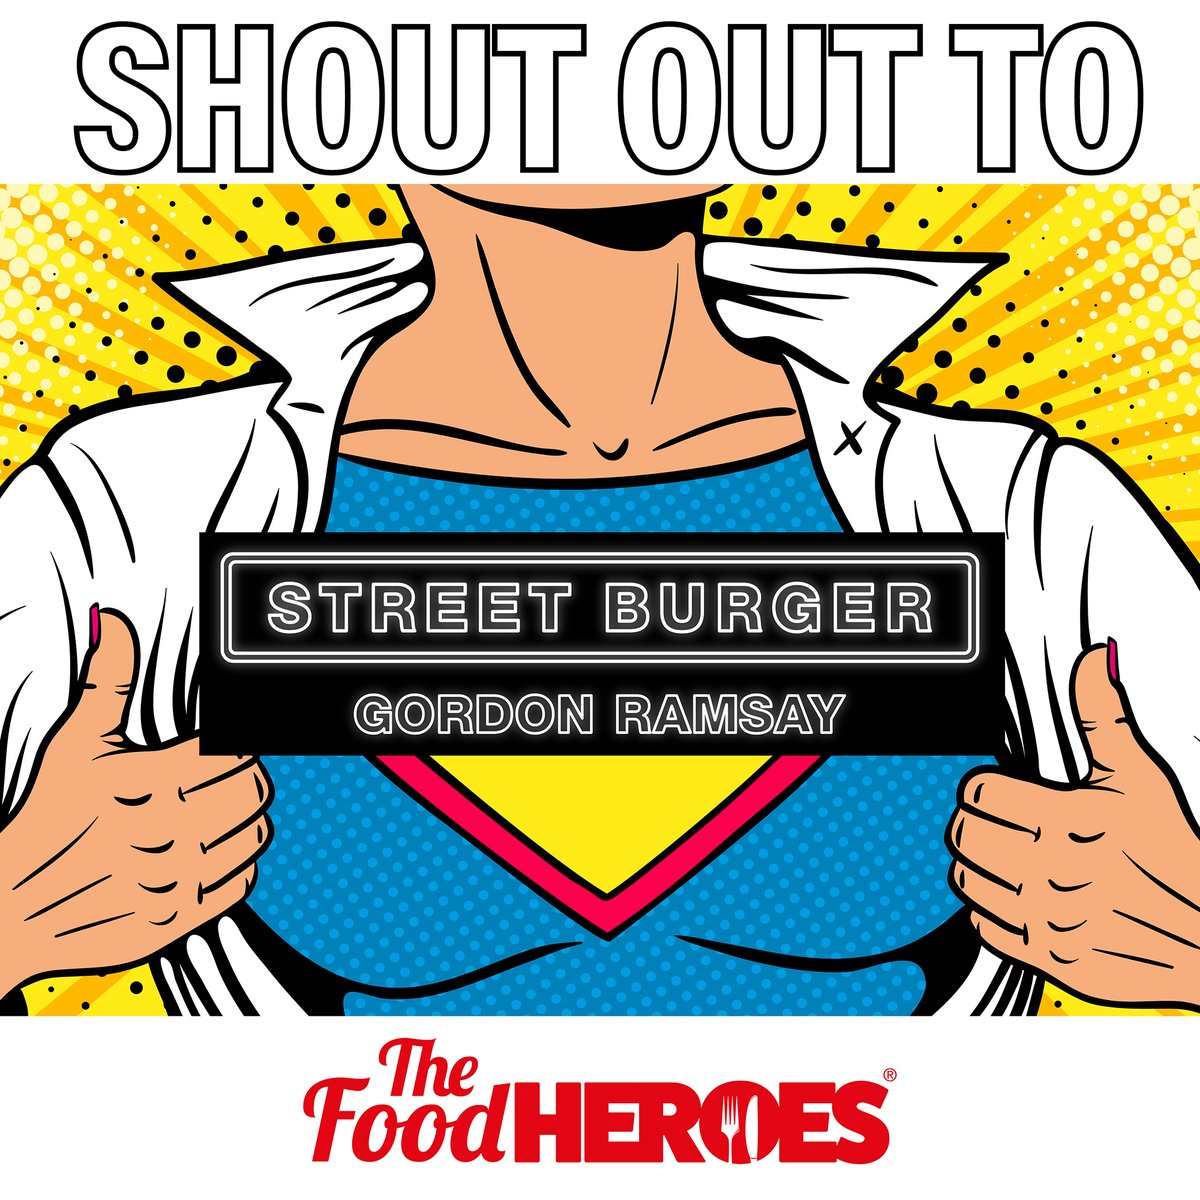 A VERY BIG THANK YOU TO GORDON RAMSAY’S Street Burger & Street Pizza from The Food Heroes Team for your amazing SUPPORT #gordonramsay #gordongram #gordonramsaystreetburger #gordonramsaystreetpizza #thankyou #pizza #burger #foodservice #shoutout #thenest #best #restaurants #uk https://t.co/b8RfoVNciK